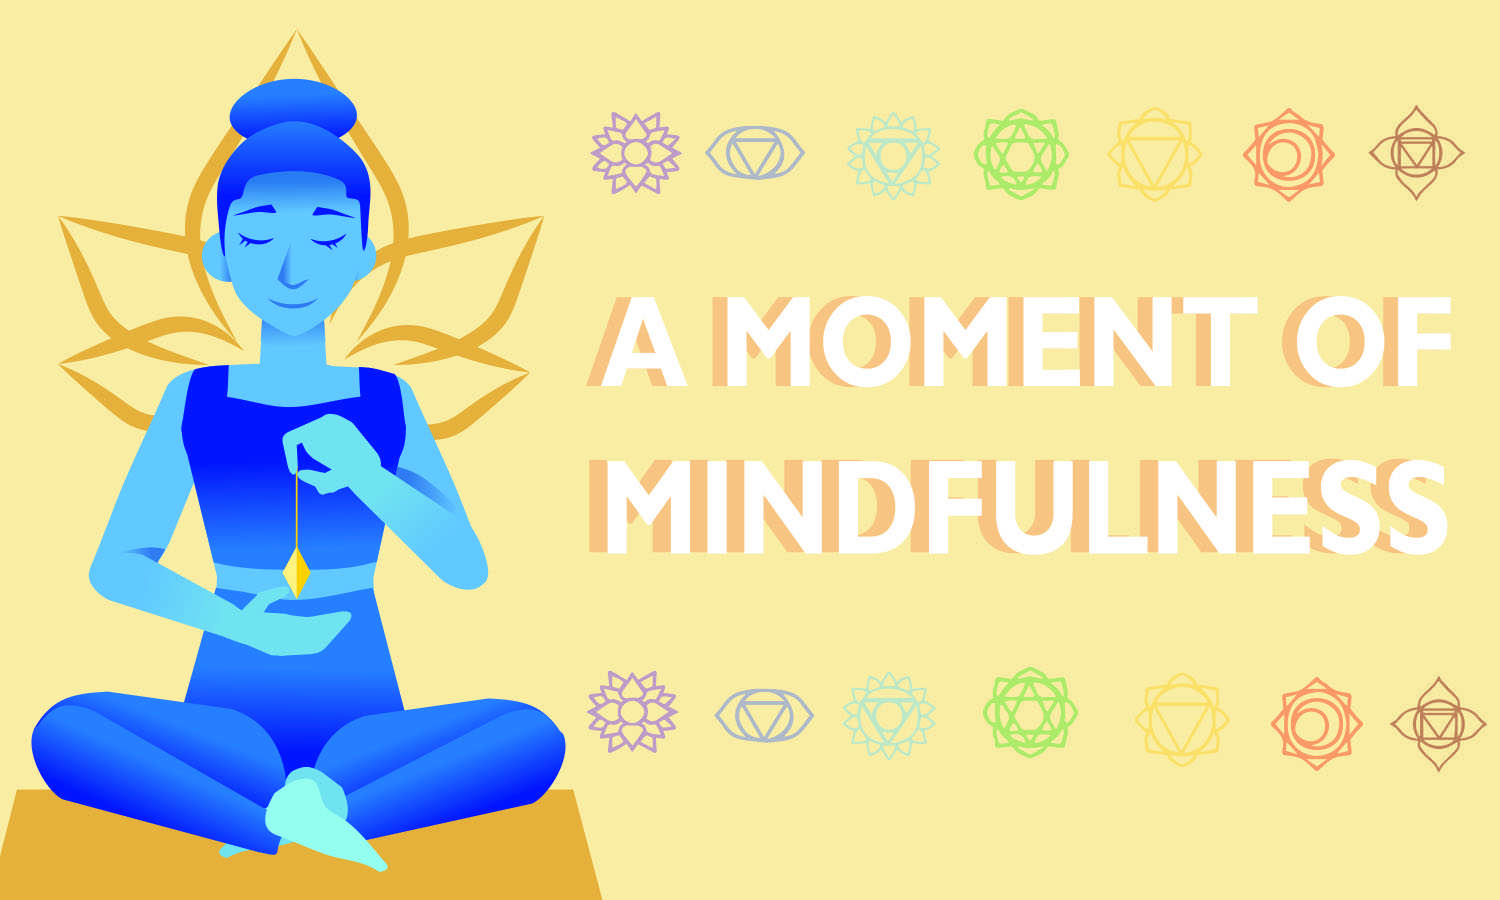 graphic illustration for a moment of mindfulness of a figure doing the lotus yoga pose with chakras